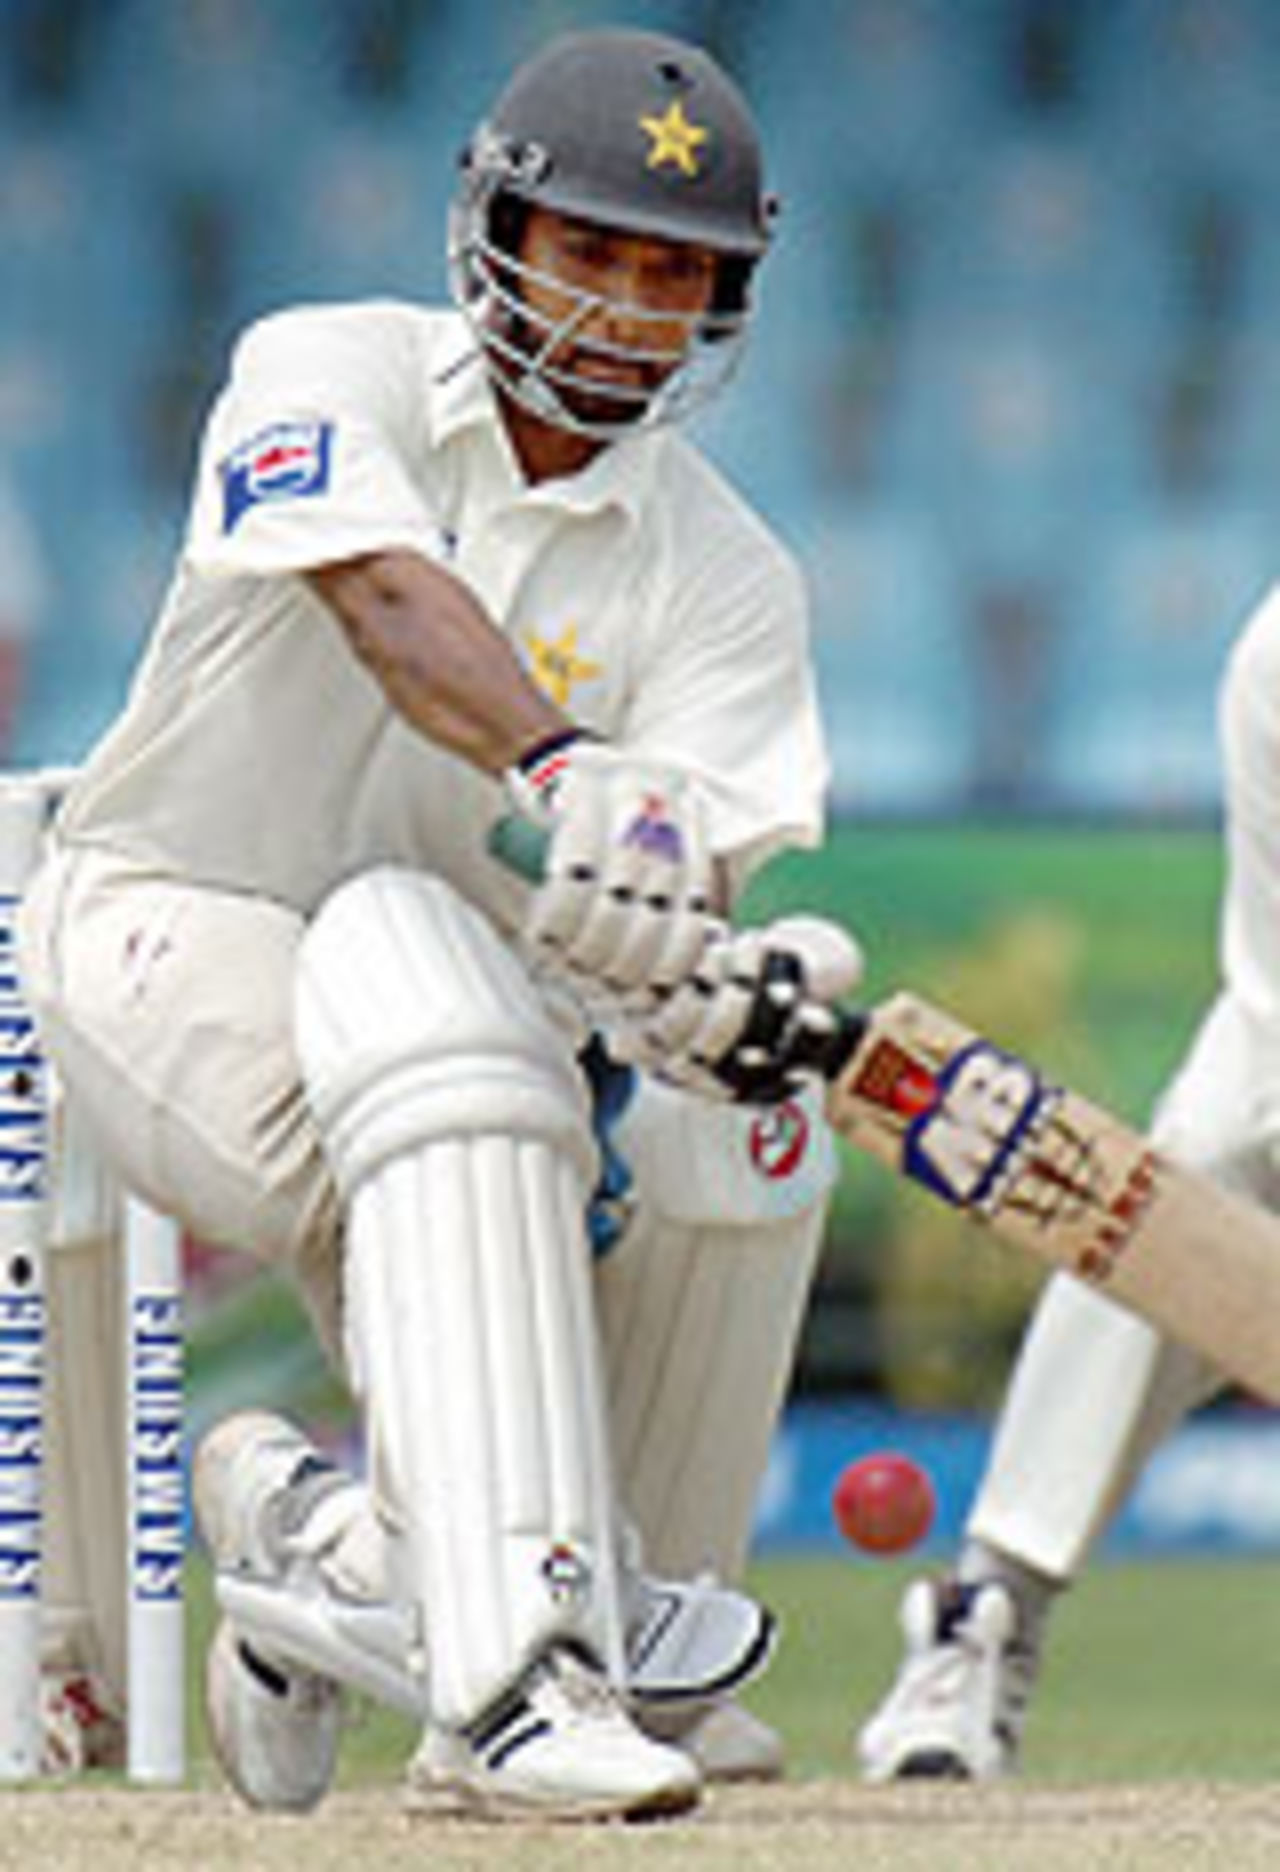 Asim Kamal sweeps yet again, Pakistan v India, 2nd Test, Lahore, 3rd day, April 7, 2004